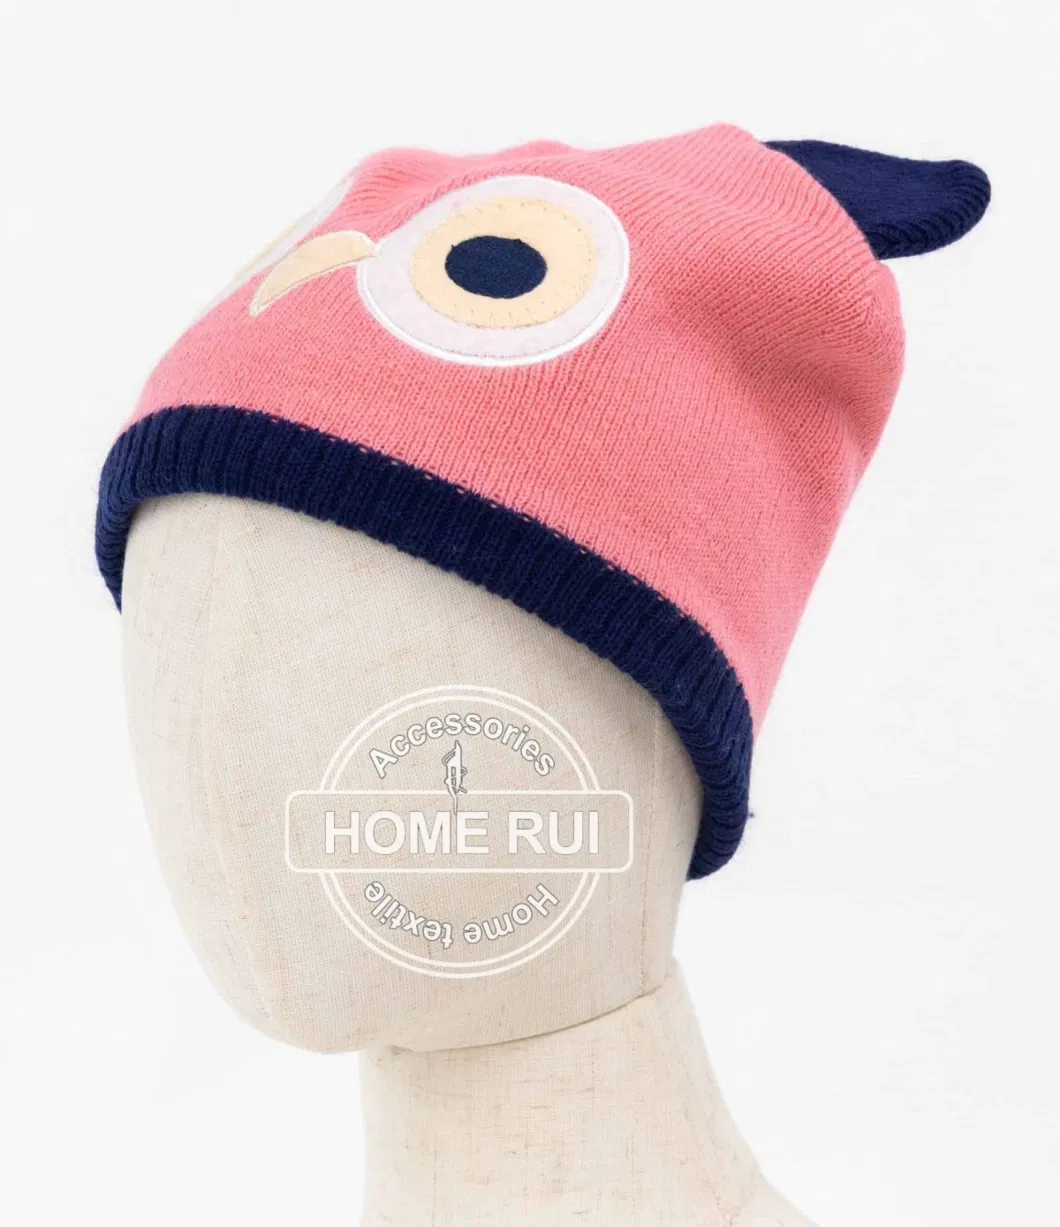 Kids Girl Children Warm Soft Slouchy Pink Solid Plain Knitted Owl Animal Design embroidery Bonnet Casual Beanie Hat